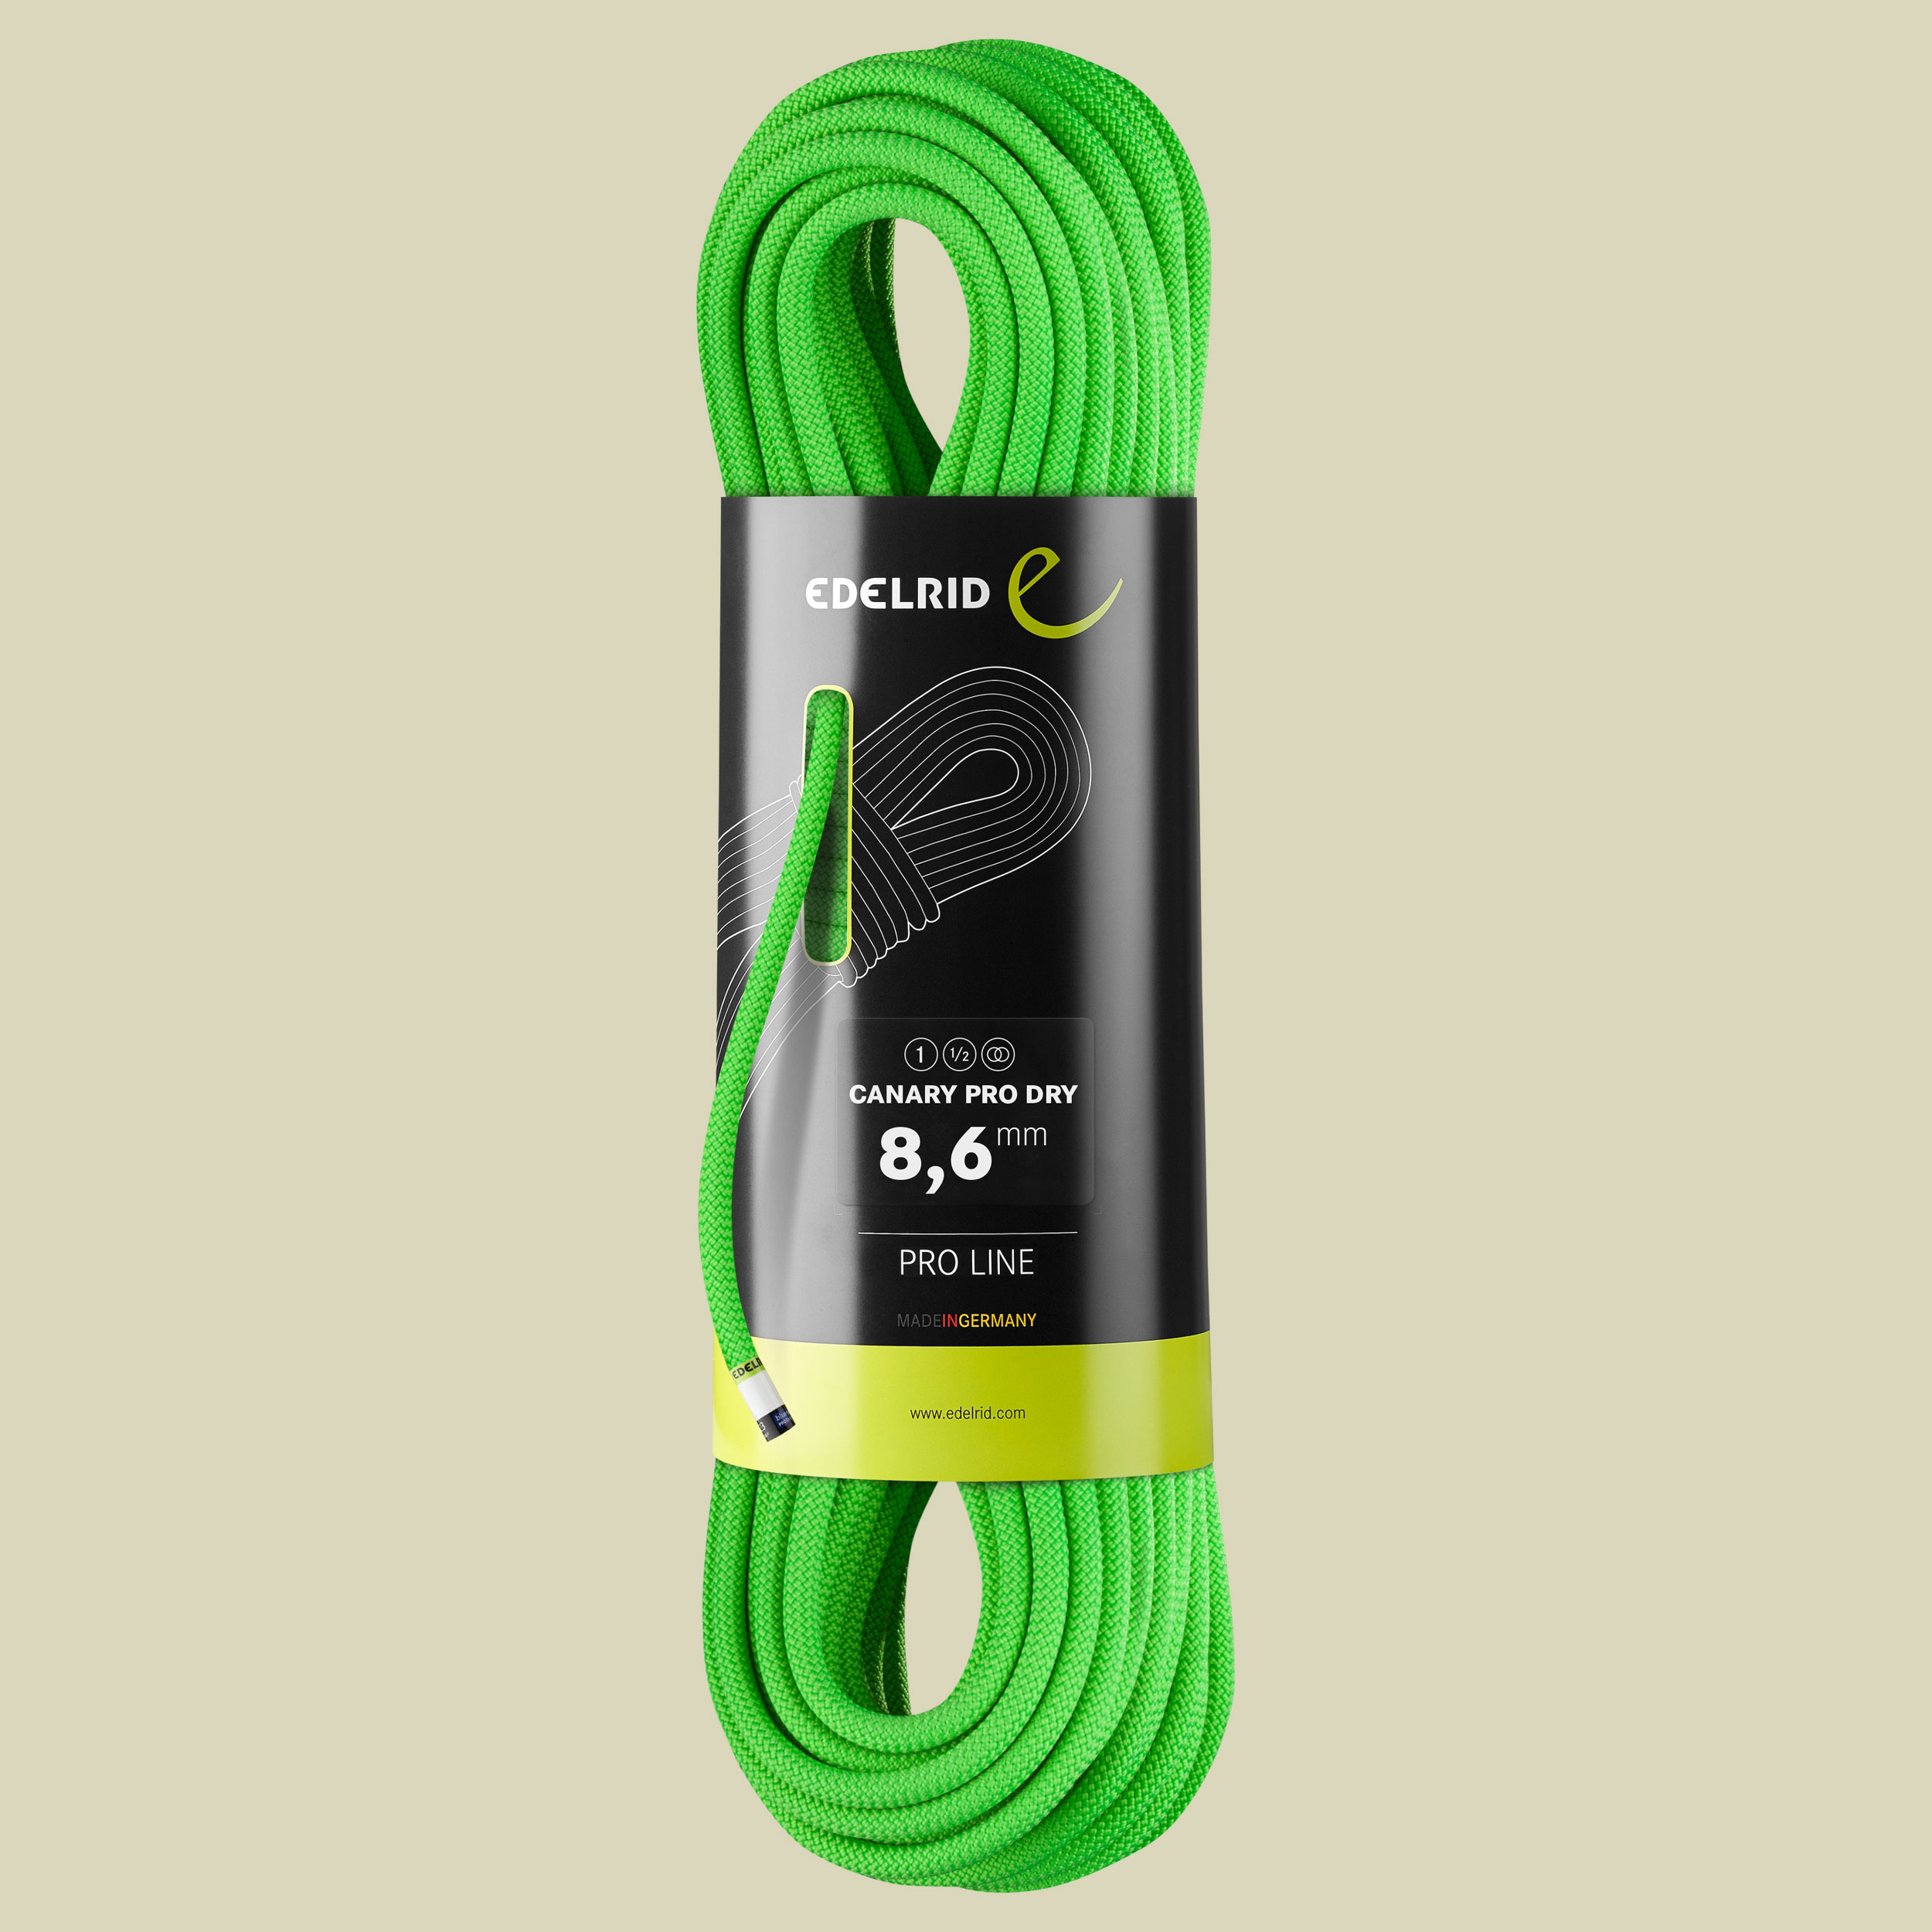 Canary Pro Dry 8.6 mm neon green 40 m